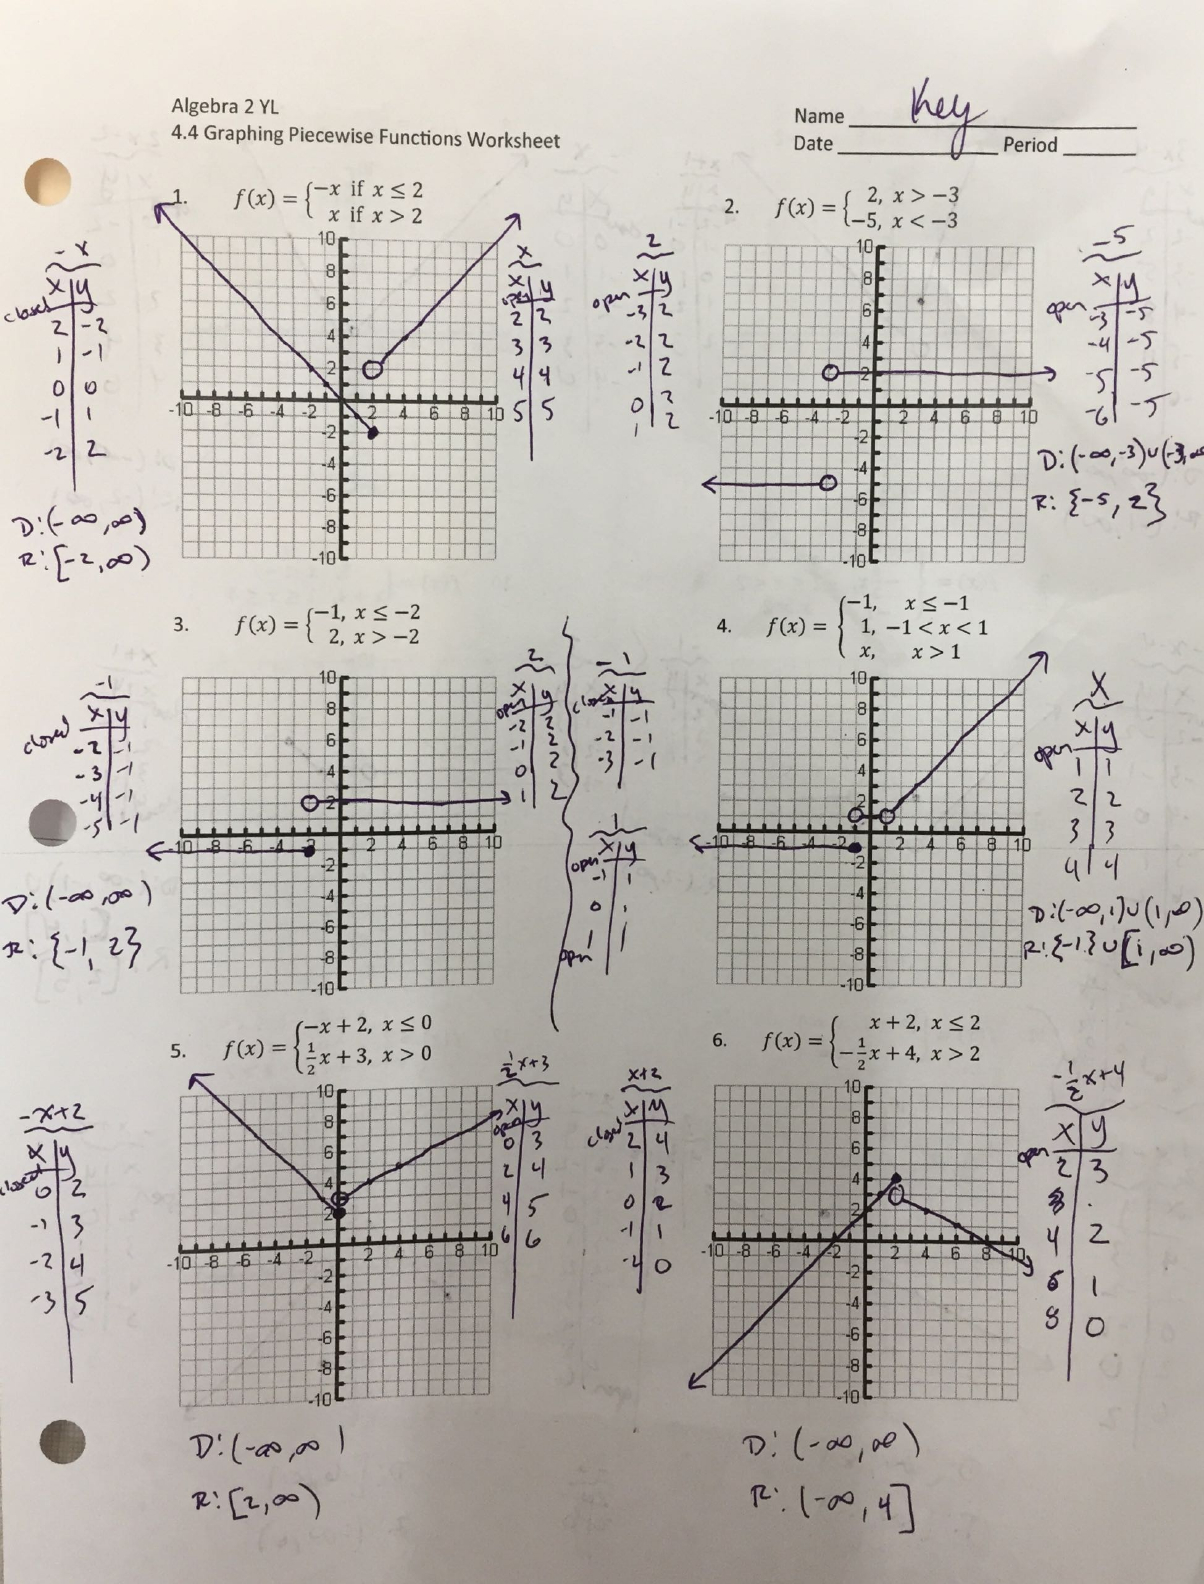 Algebra 2 Yl 44 Graphing Piecewise Functions 2 Yl 44